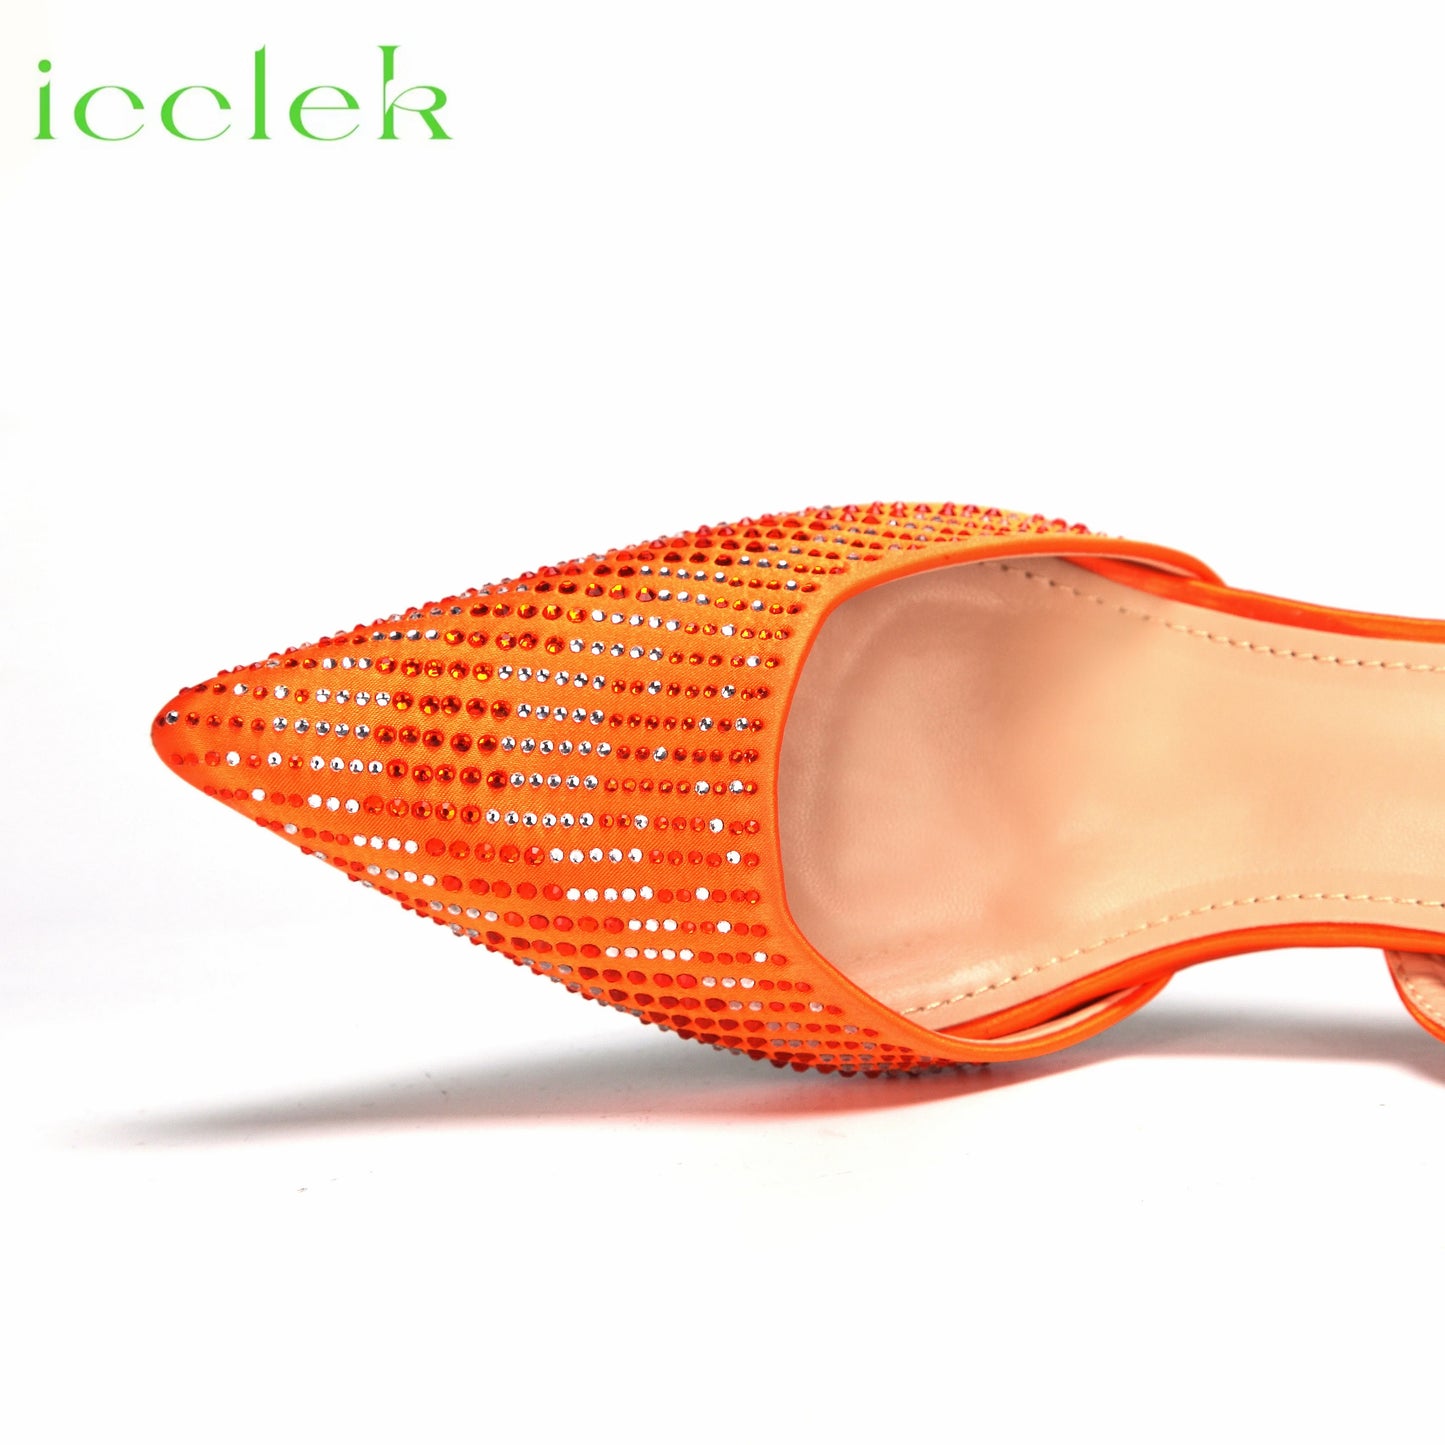 Orange Color Pointed Toe Crystal Design Thin Heel Ladies Shoes Matching Bag Set For Nigerian Women Party